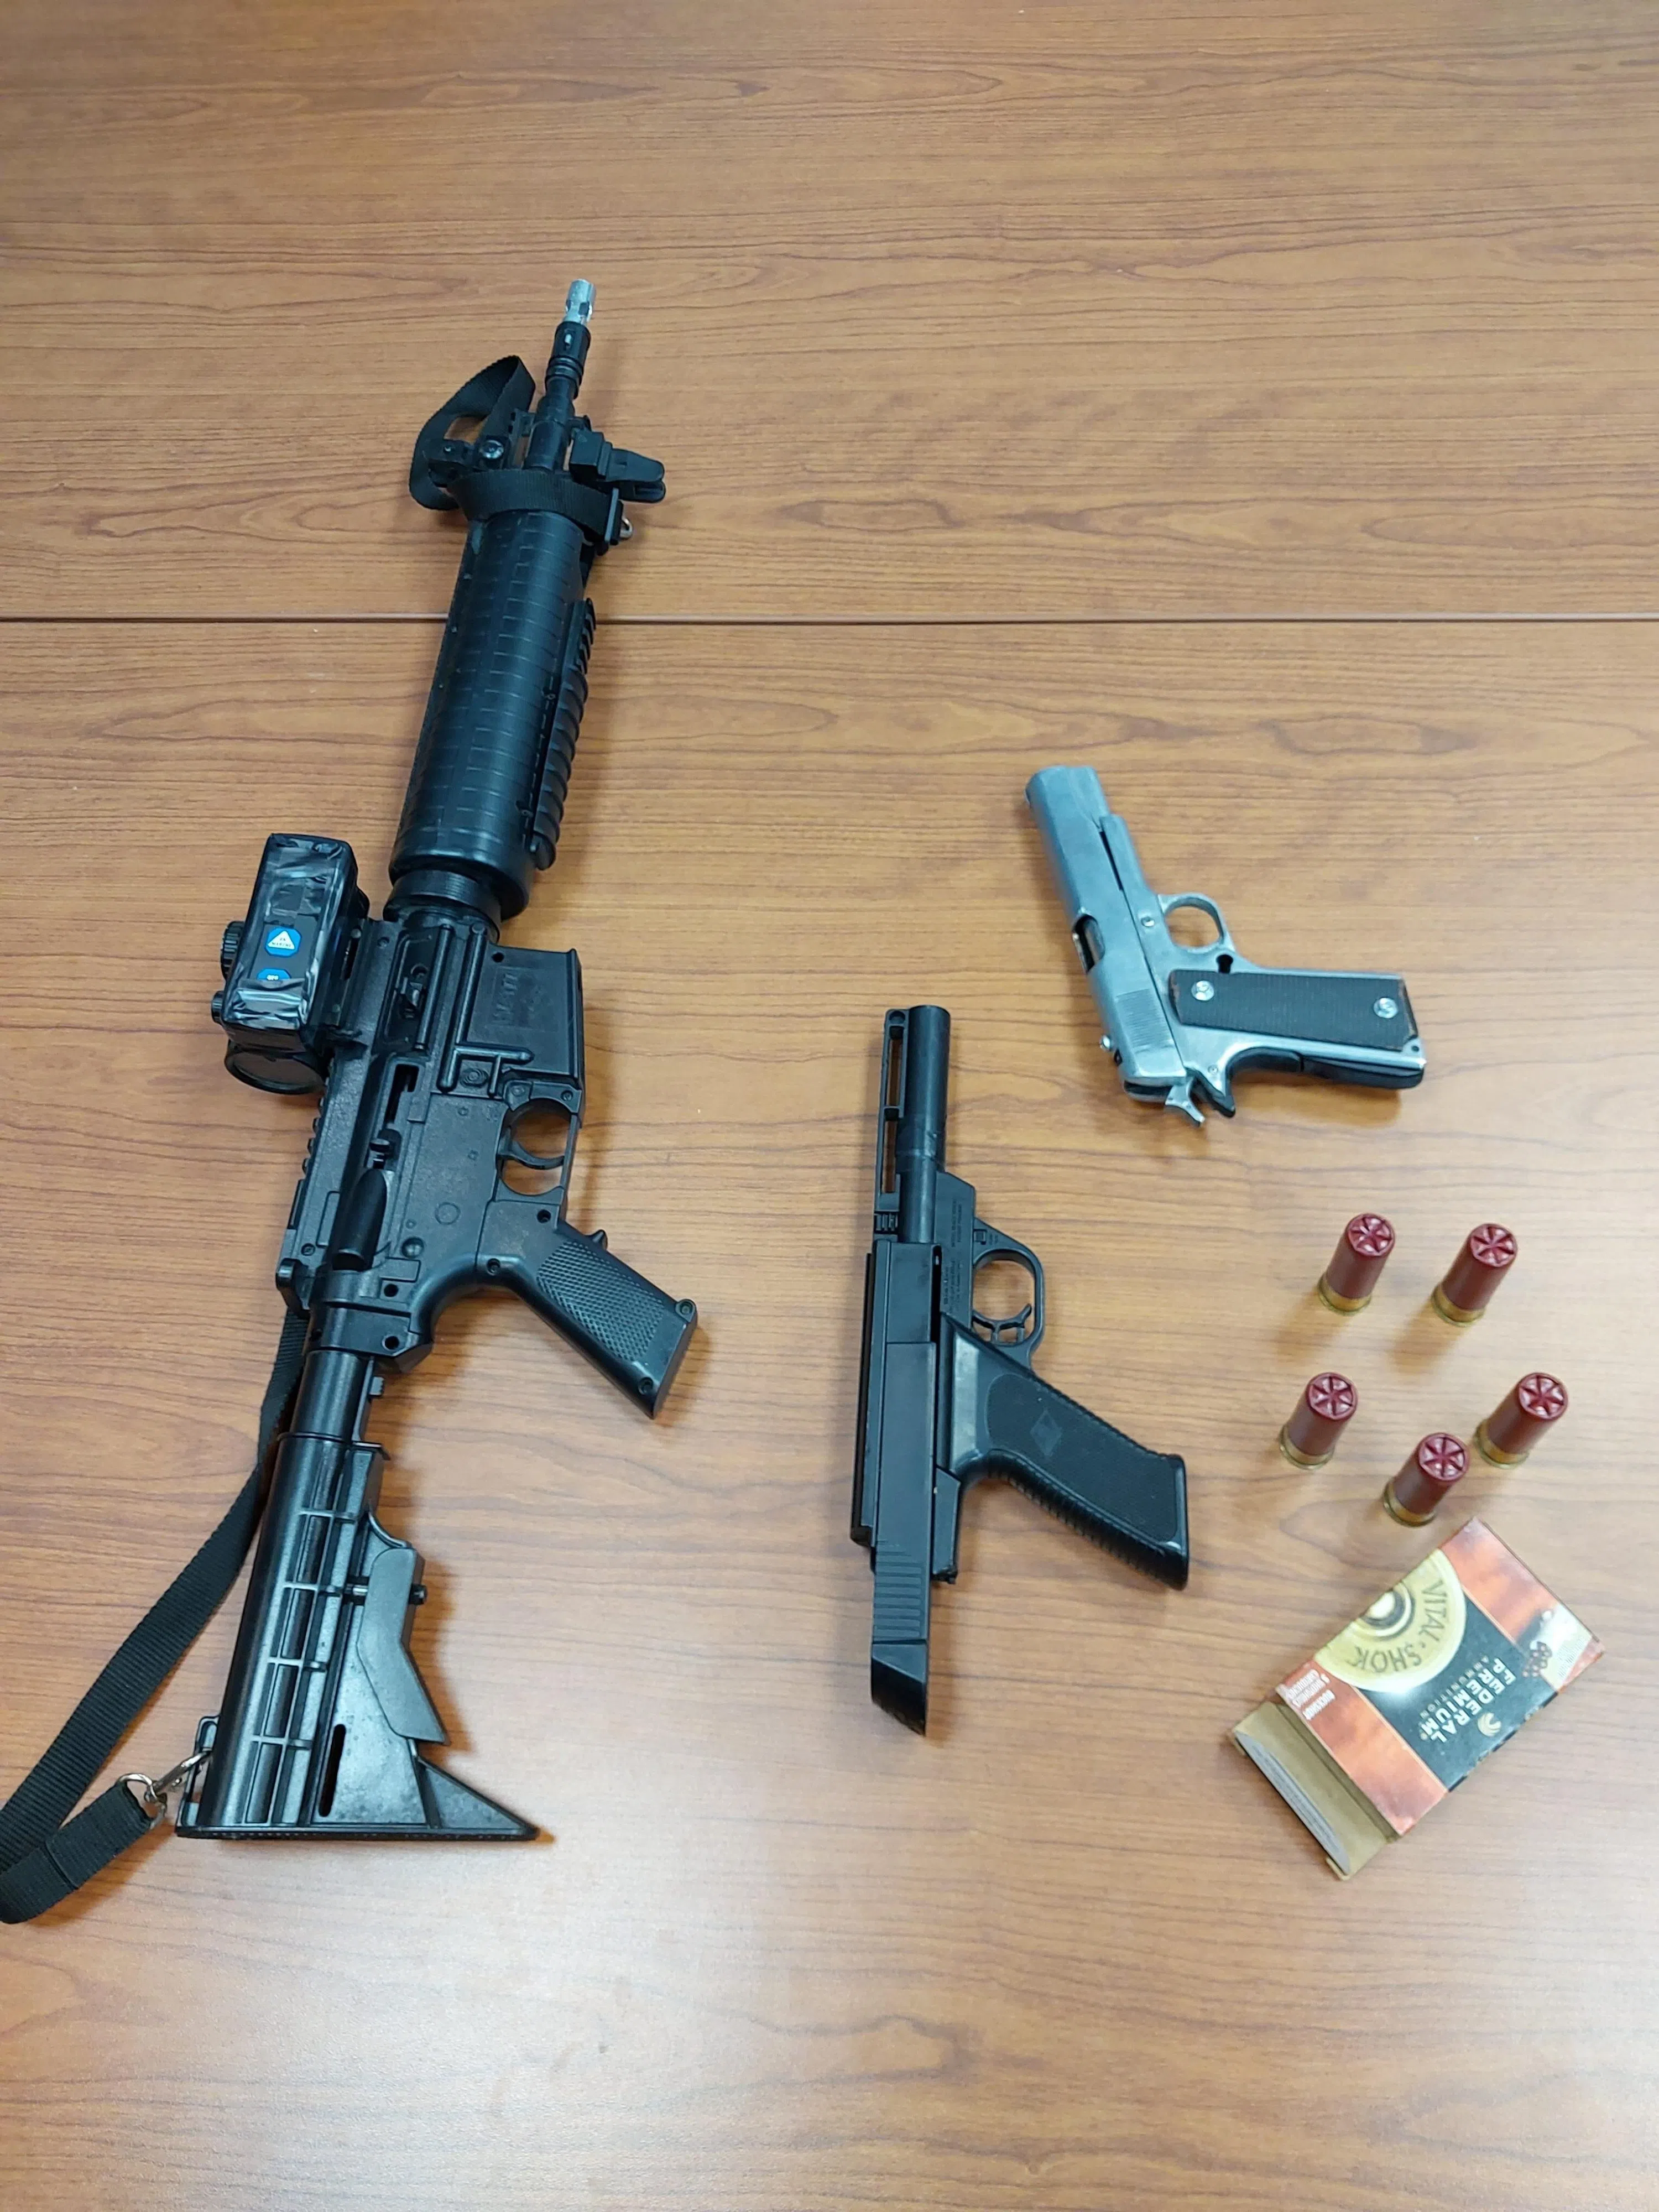 Imitation Weapon Charges In Kincardine Incident